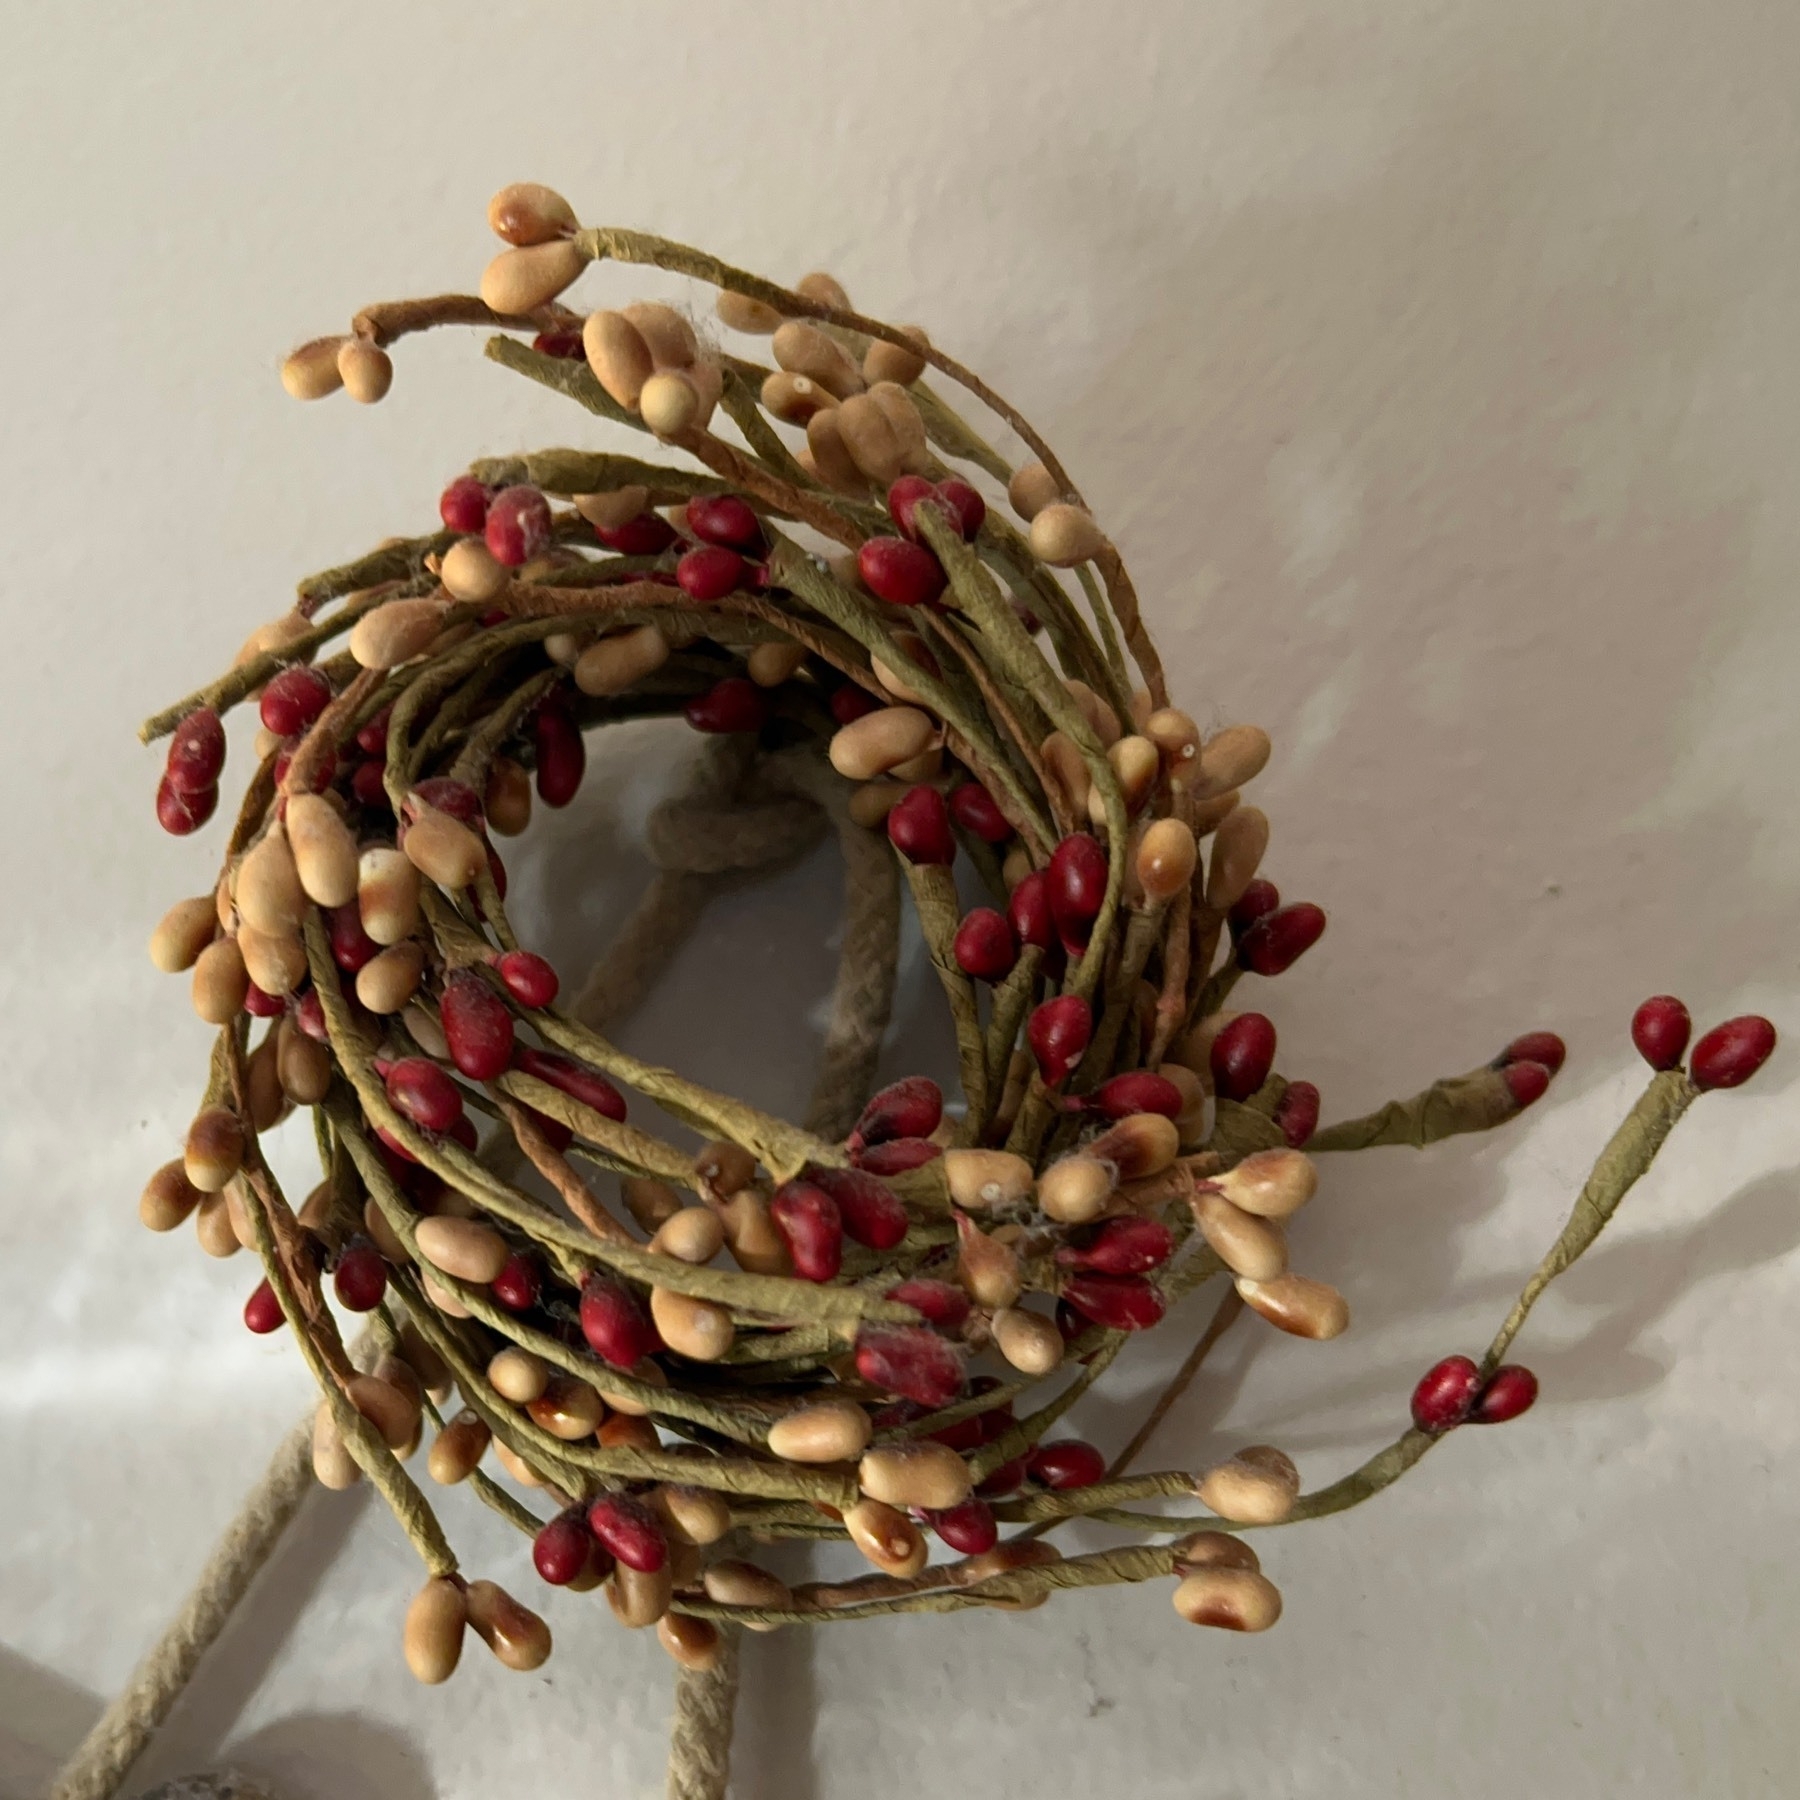 Ornamental branches with small berries formed into a circle on a wall. 